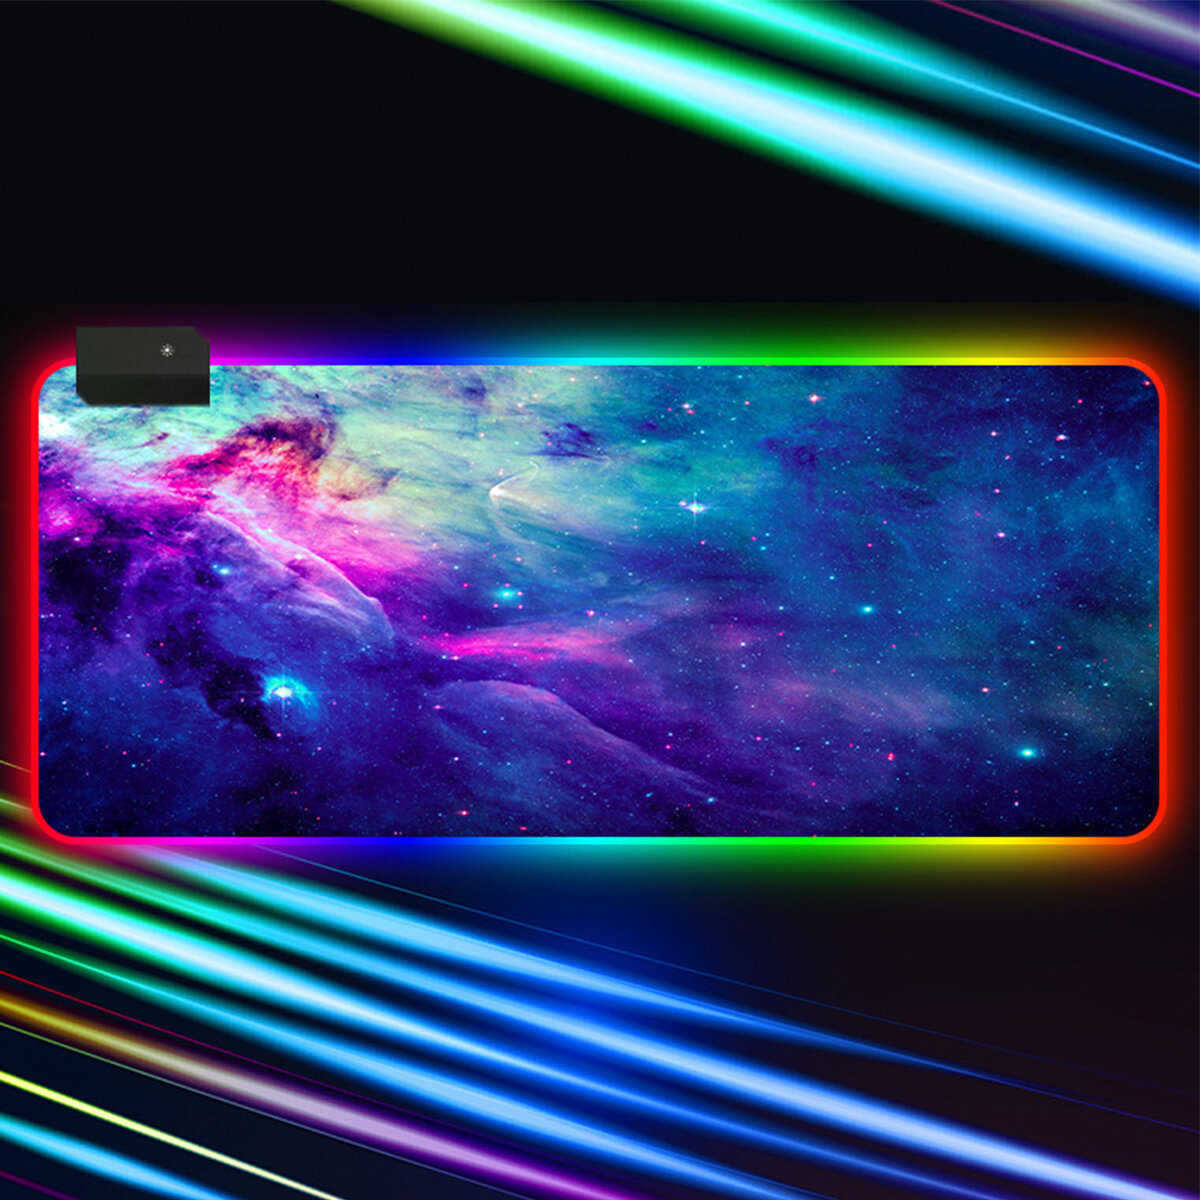 

RGB Keyboard / Mouse Pad Soft Rubber Anti-slip USB Powered LED Glowing Gaming Keyboard Pad Desktop Protective Mat for Ho